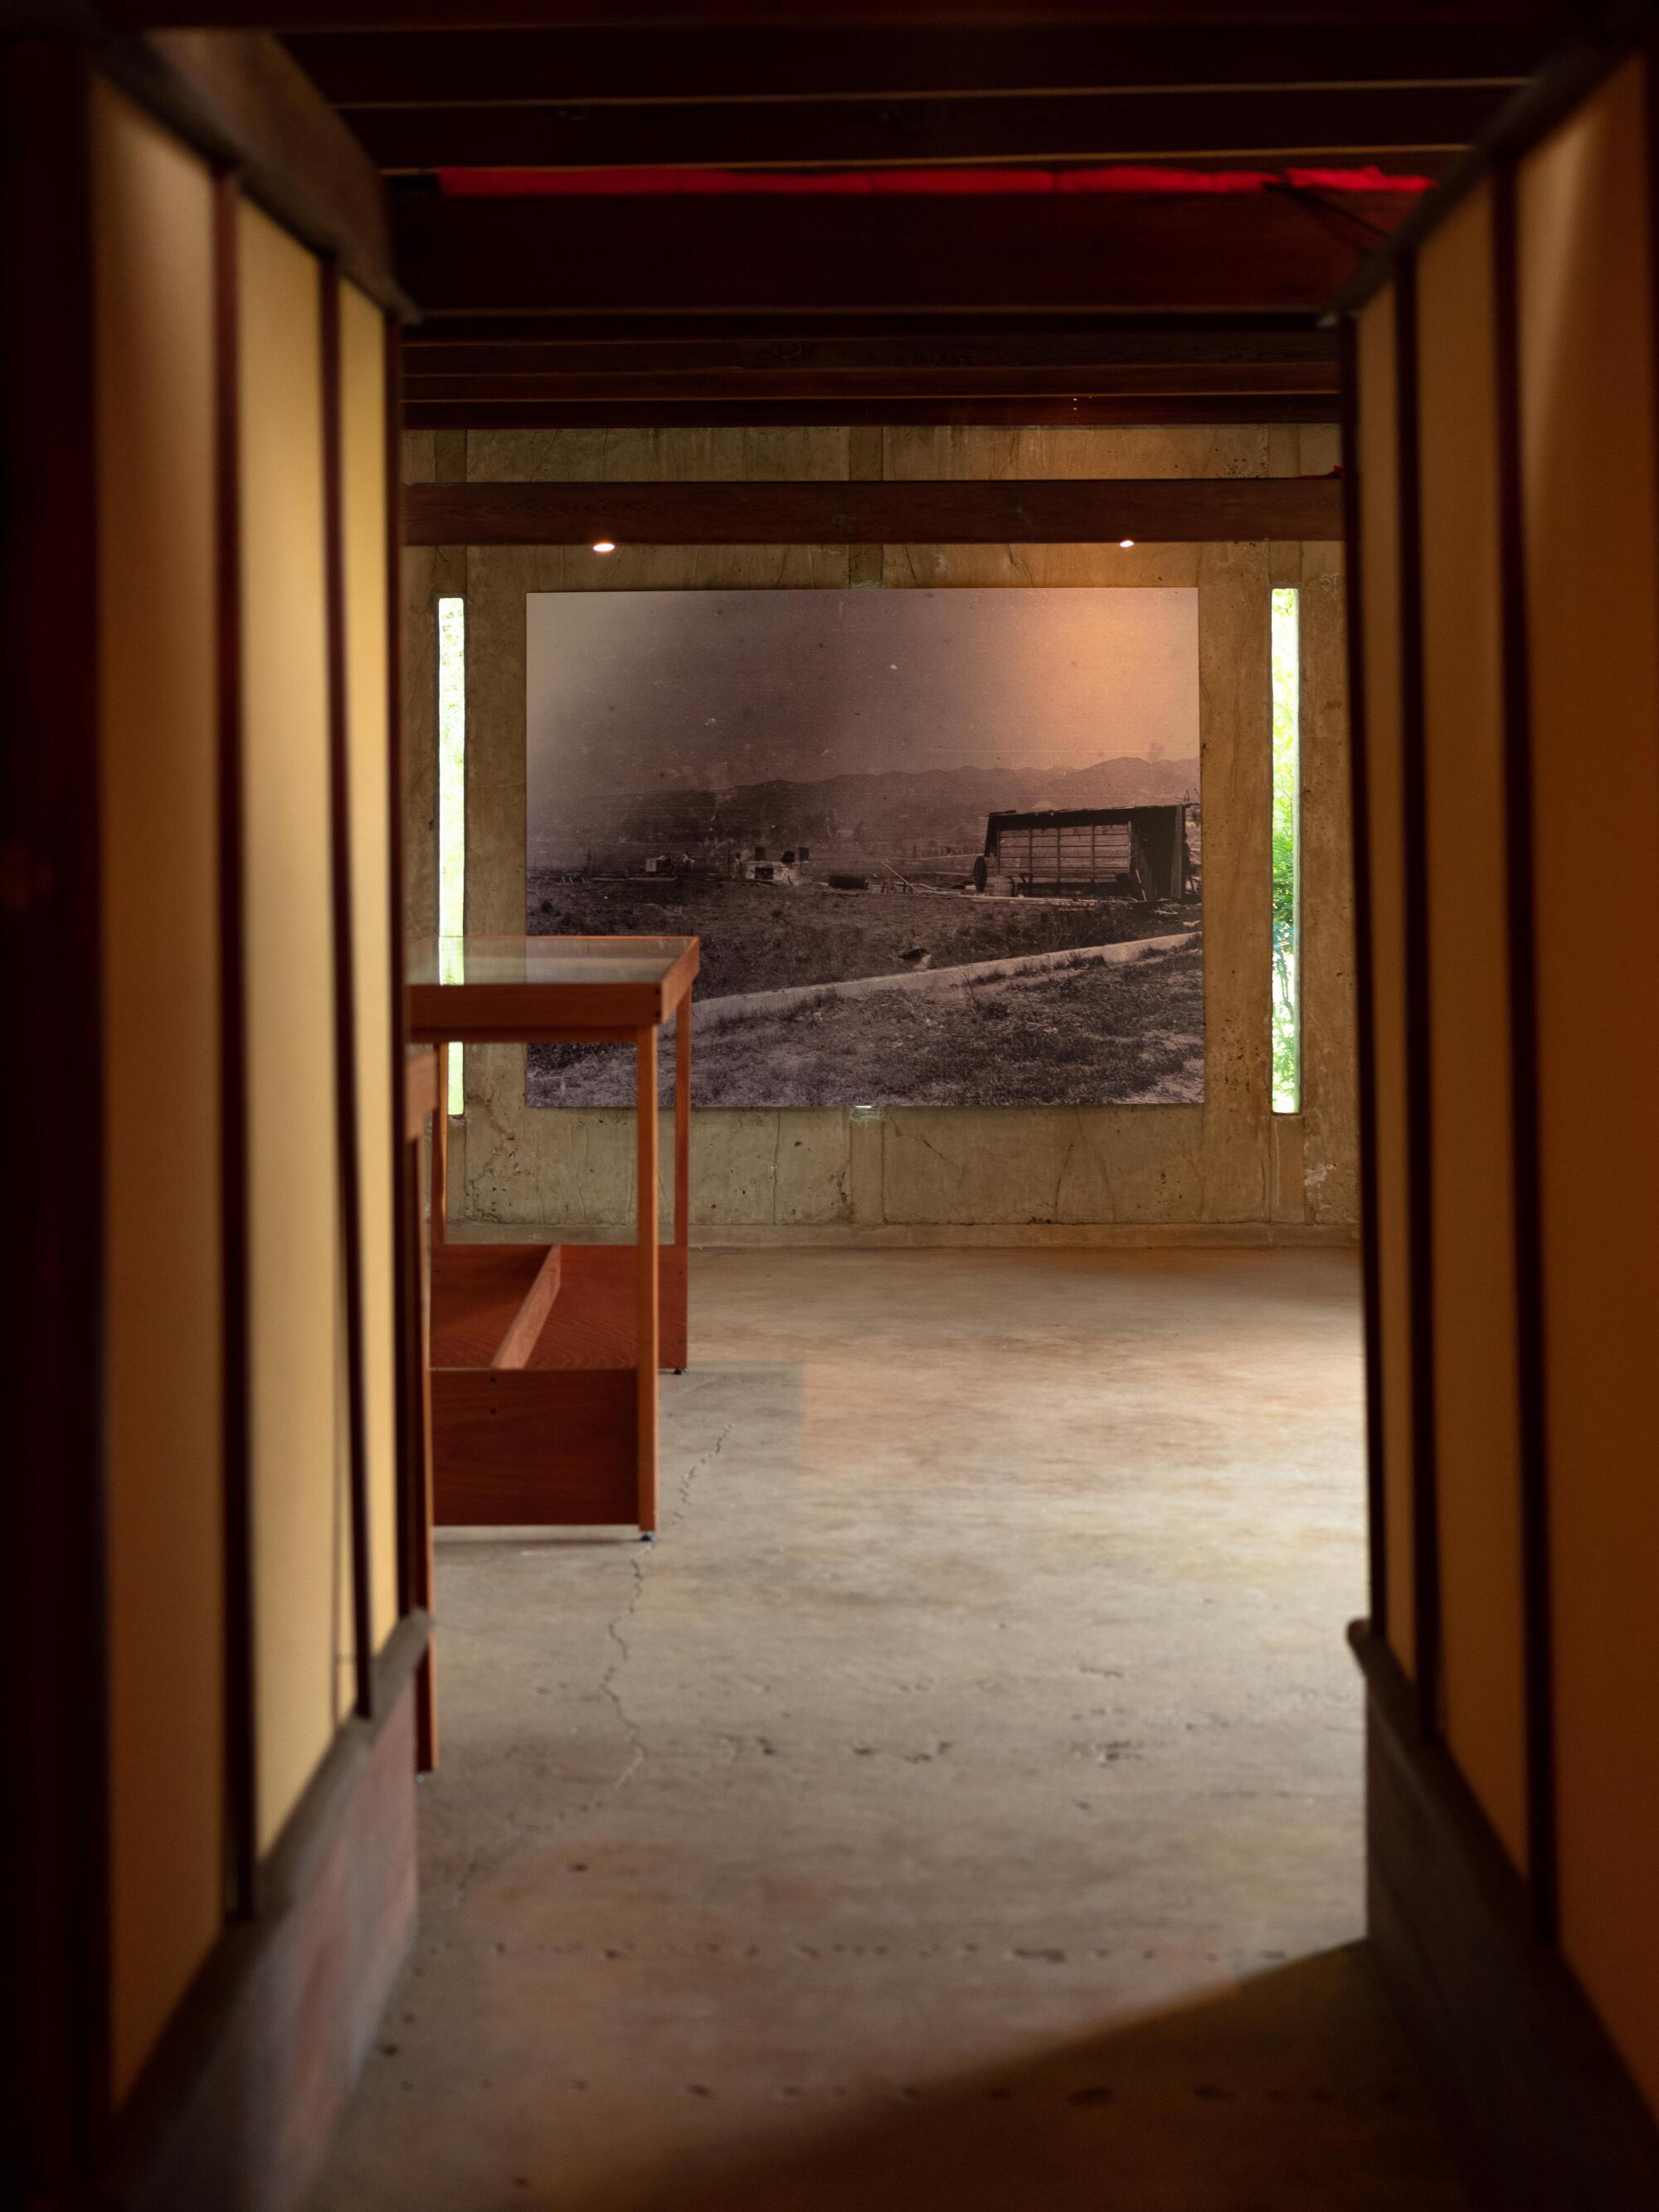 A view through a wood-lined hallway ends on a room where a vintage photograph is displayed on a concrete wall.